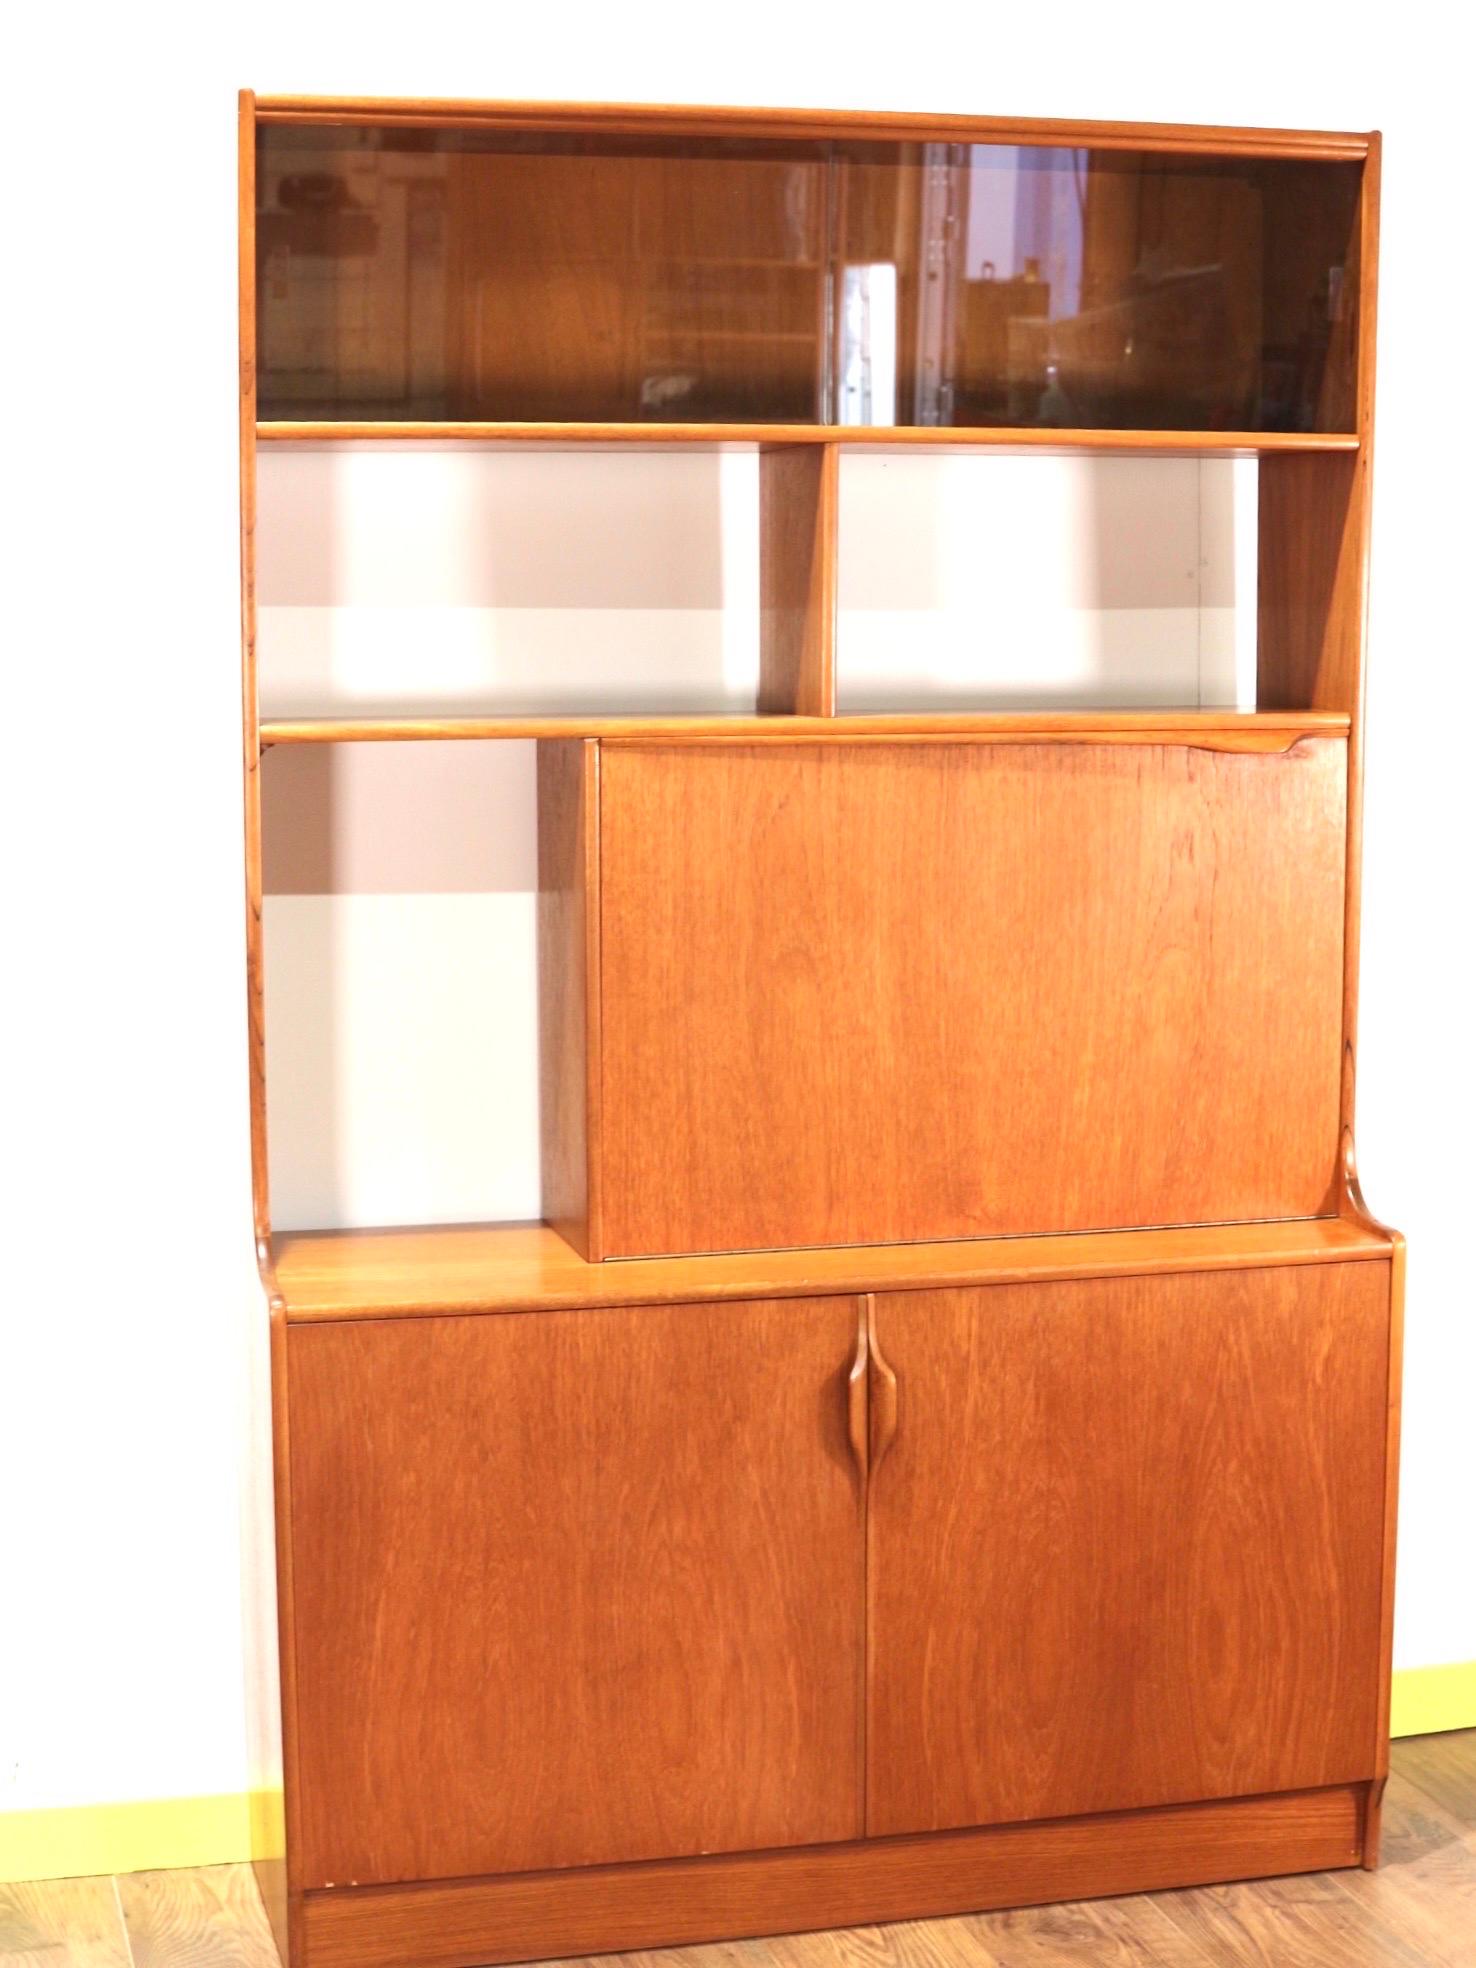 Stunning teak room divider Drinks cabinet by S Form, from Sutcliffe’s of Todmorden. This lovely display room divider dates from Around 1960s and is constructed with teak veneer. This English manufactured item has a very sleek design that’s typical